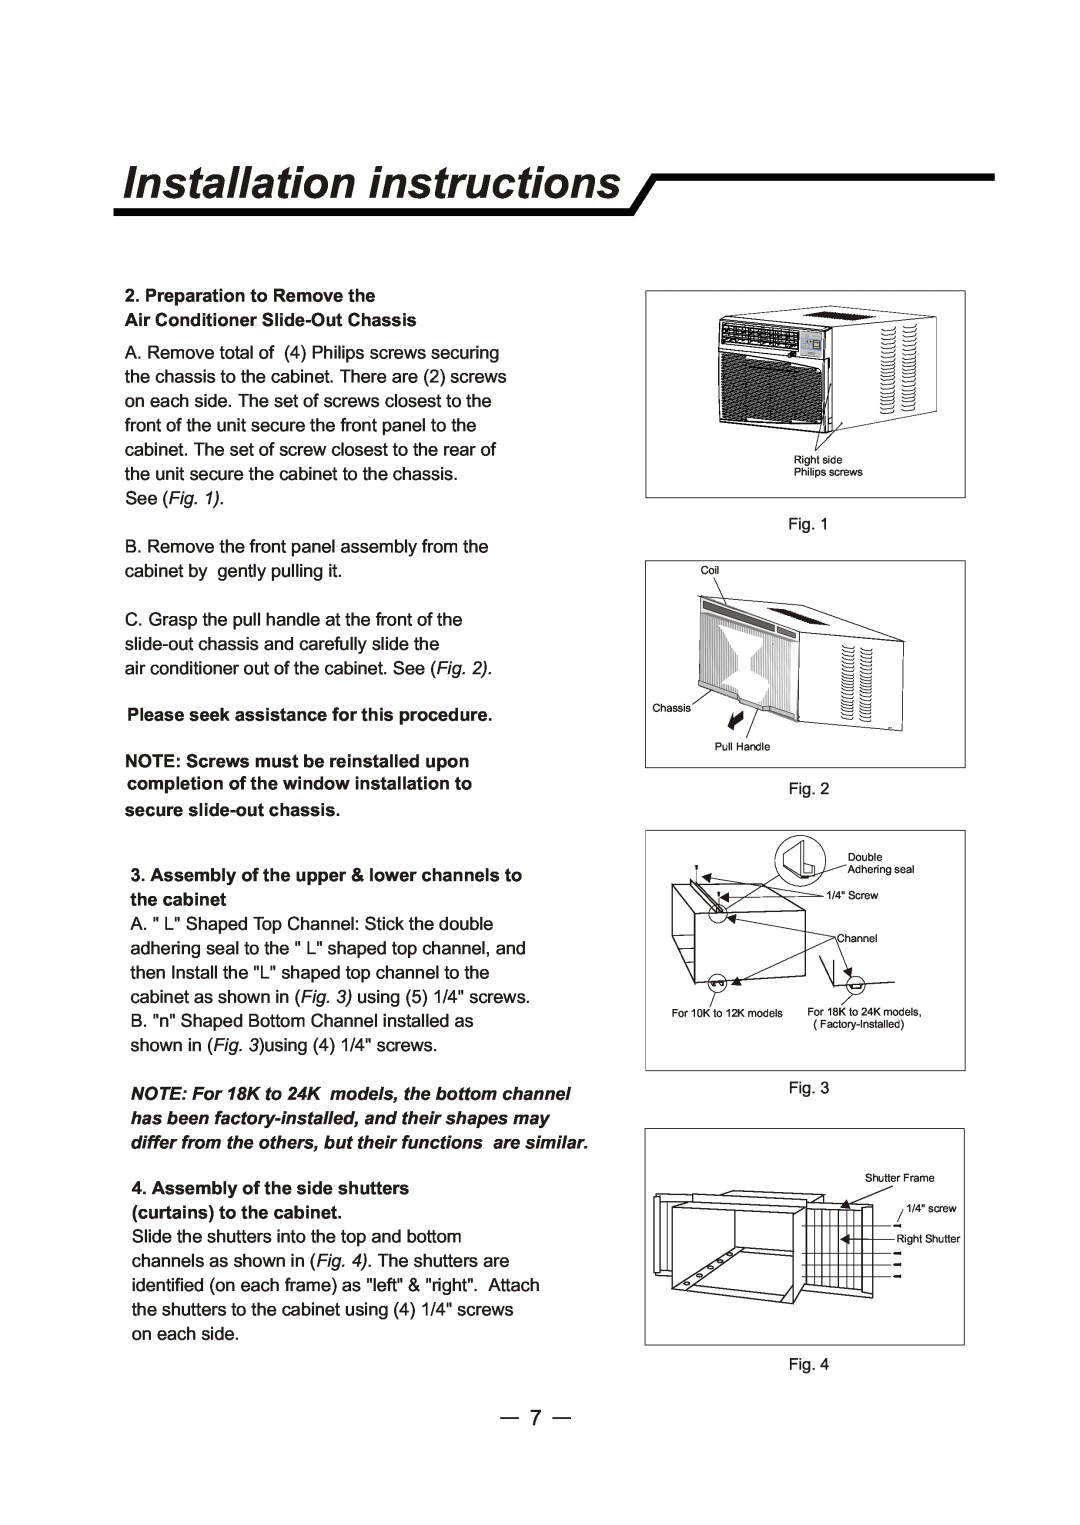 Sunbeam SCA103RWB1 Installation instructions, Preparation to Remove the, Air Conditioner Slide-OutChassis, See Fig 